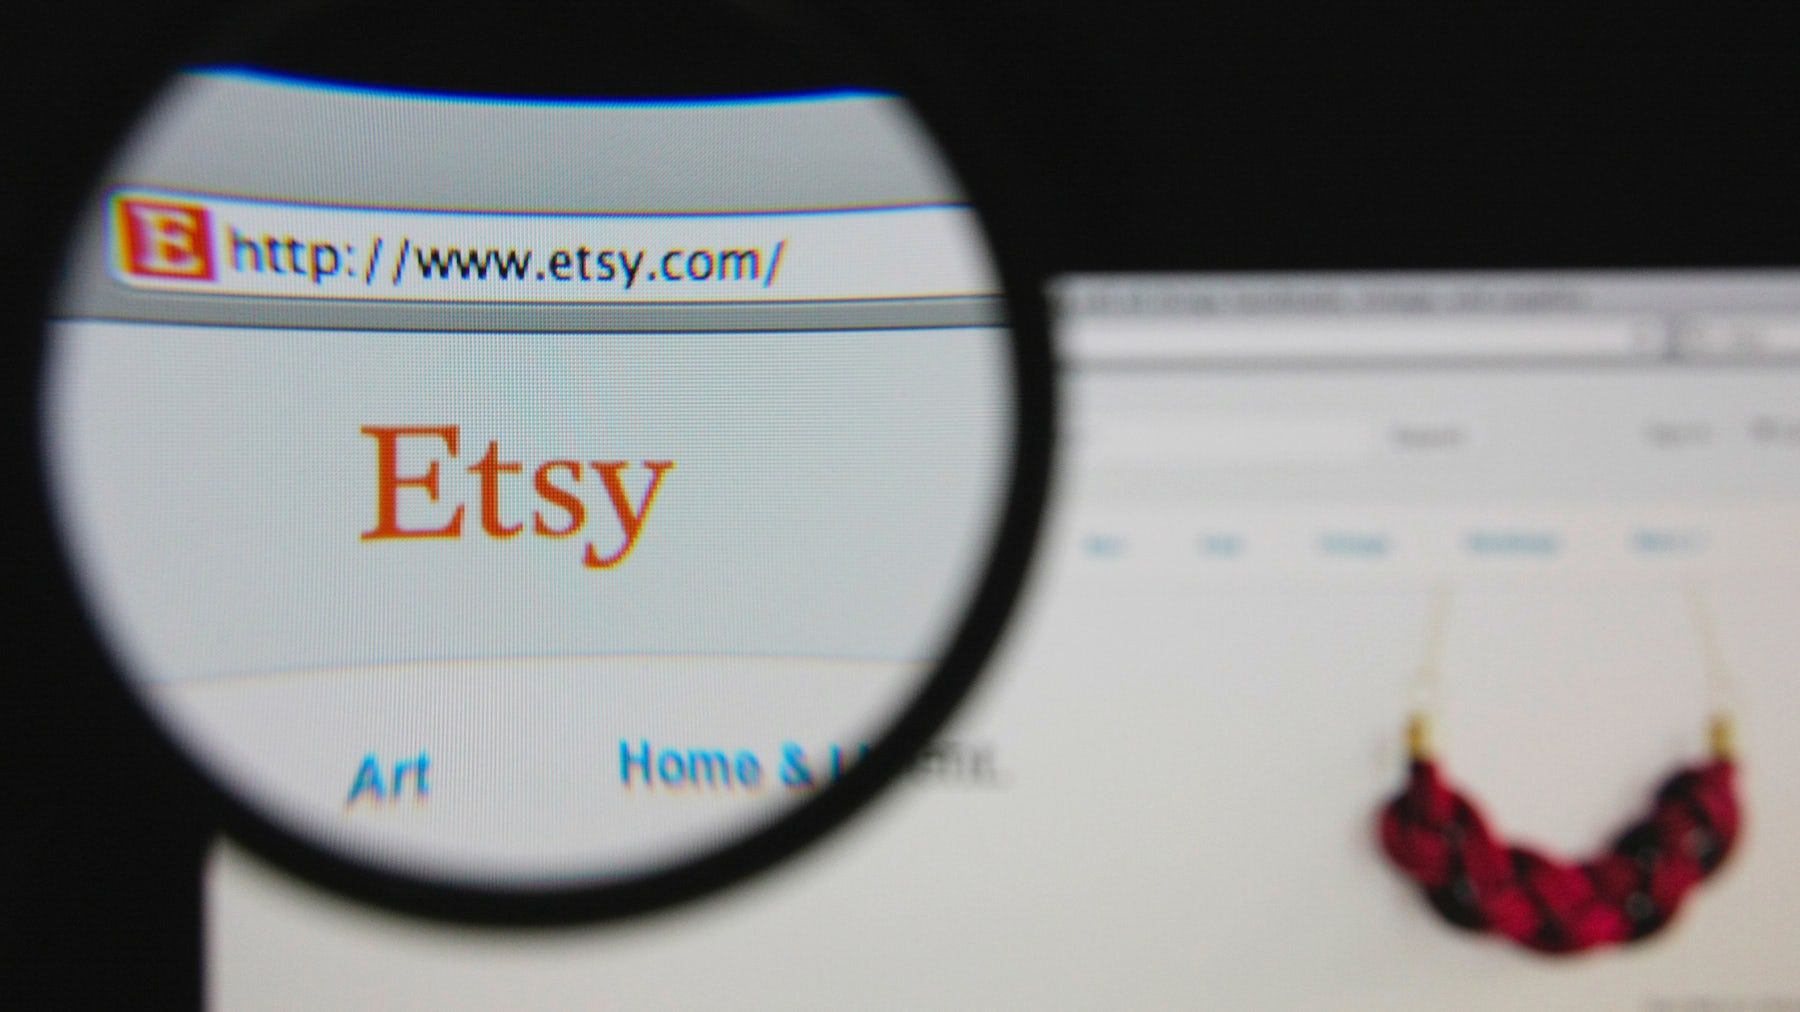 Etsy Shares Fall After Citron Research Calls Out Platform for Counterfeit Goods